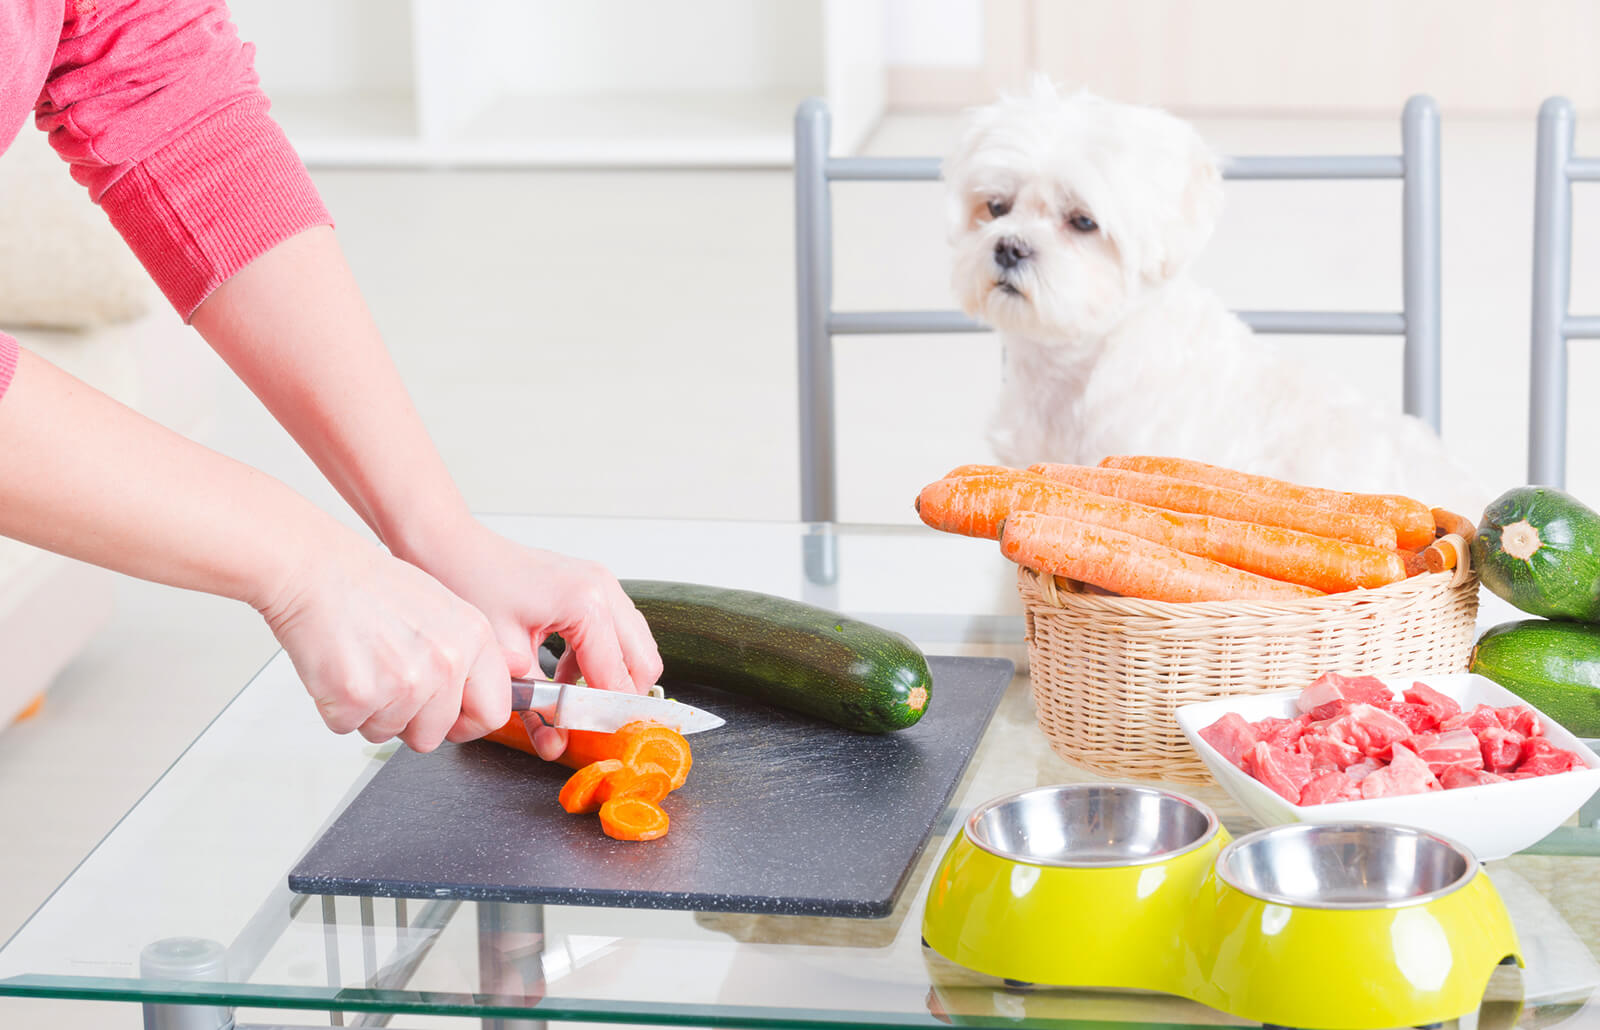 Homemade Dog Food: Is It Healthy to Cook for Your Dog?